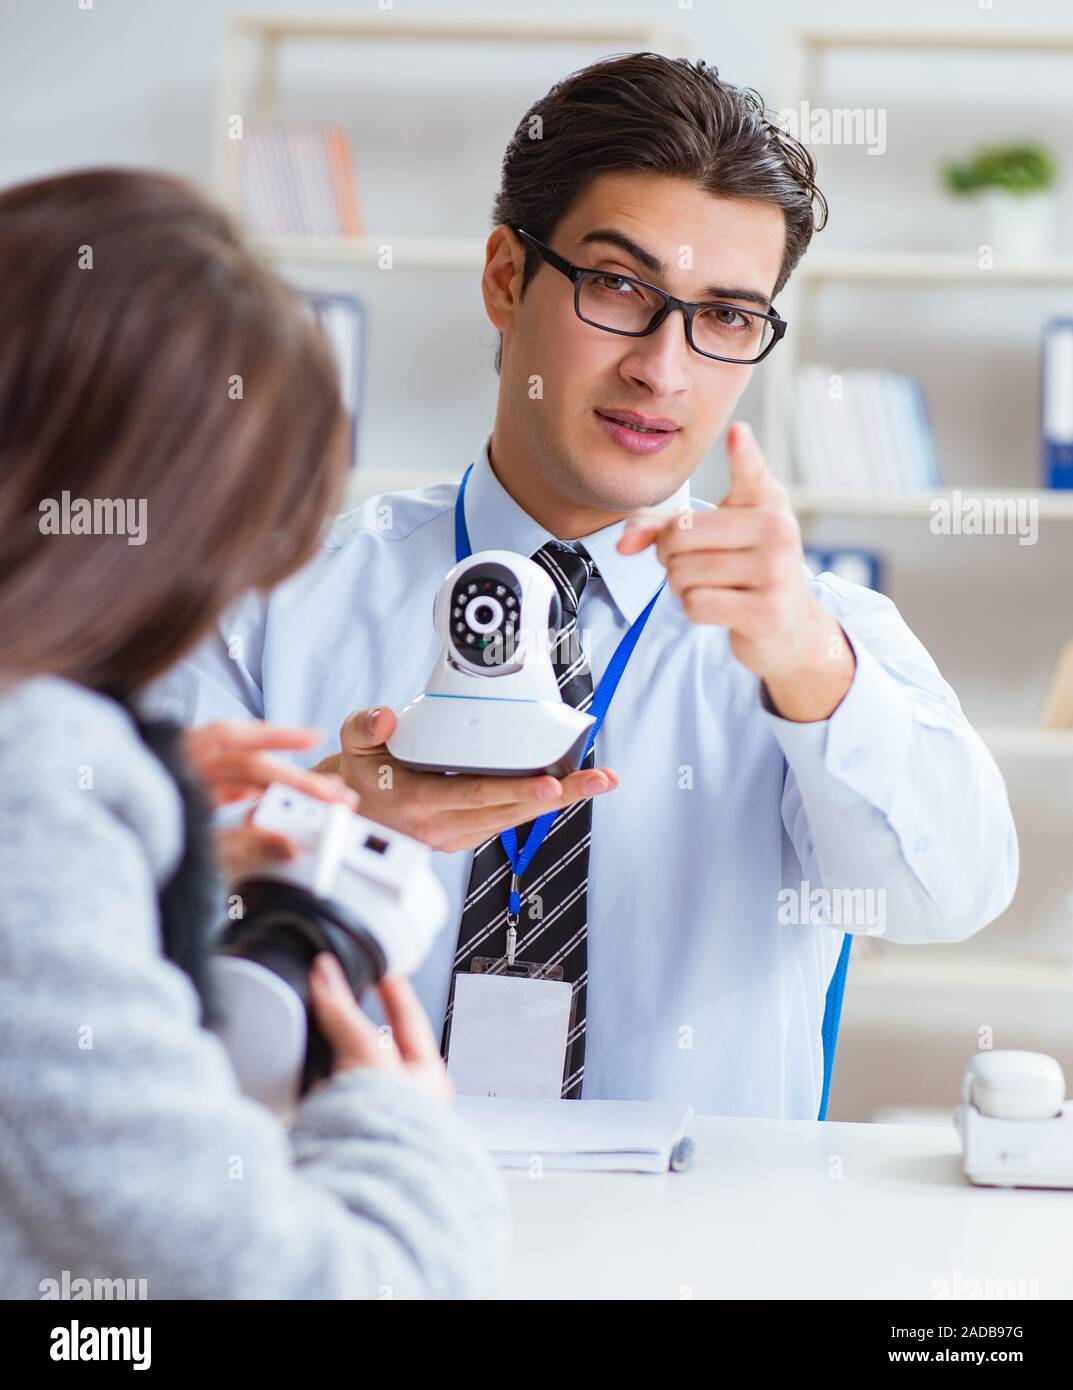 Sales assistant showing cameras to client in shop Stock Photo